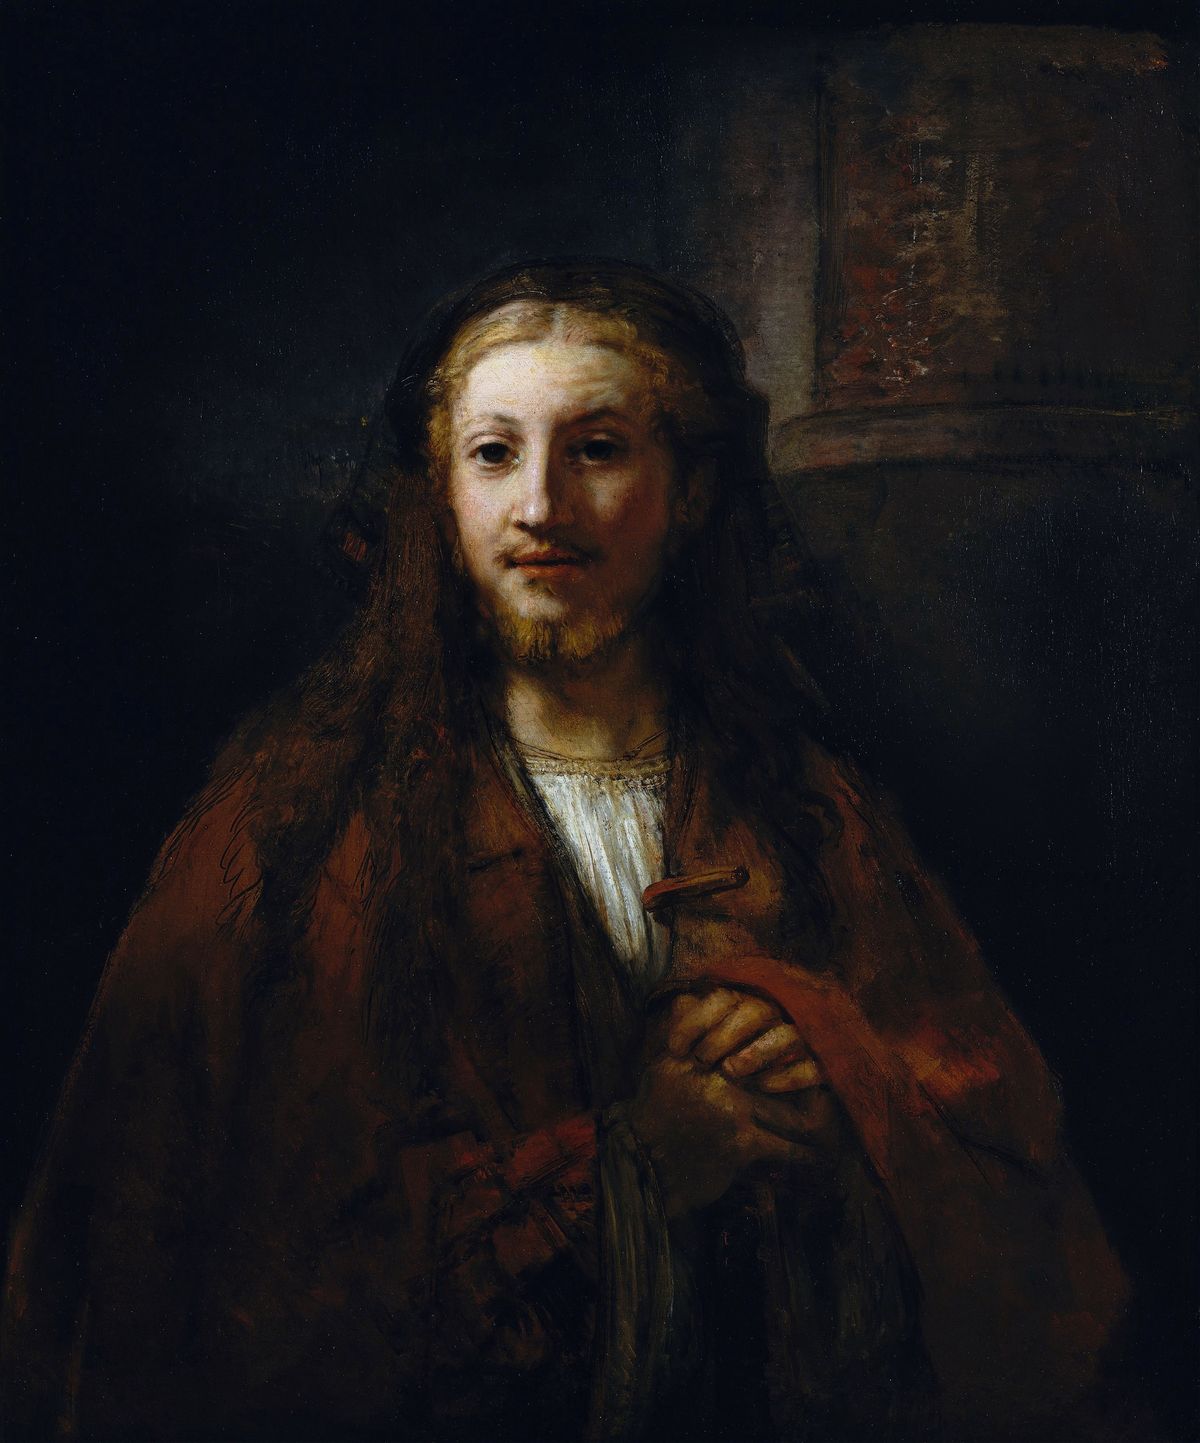 Christ with a Staff (17th Century) by Follower of Rembrandt van Rijn - Public Domain Catholic Painting